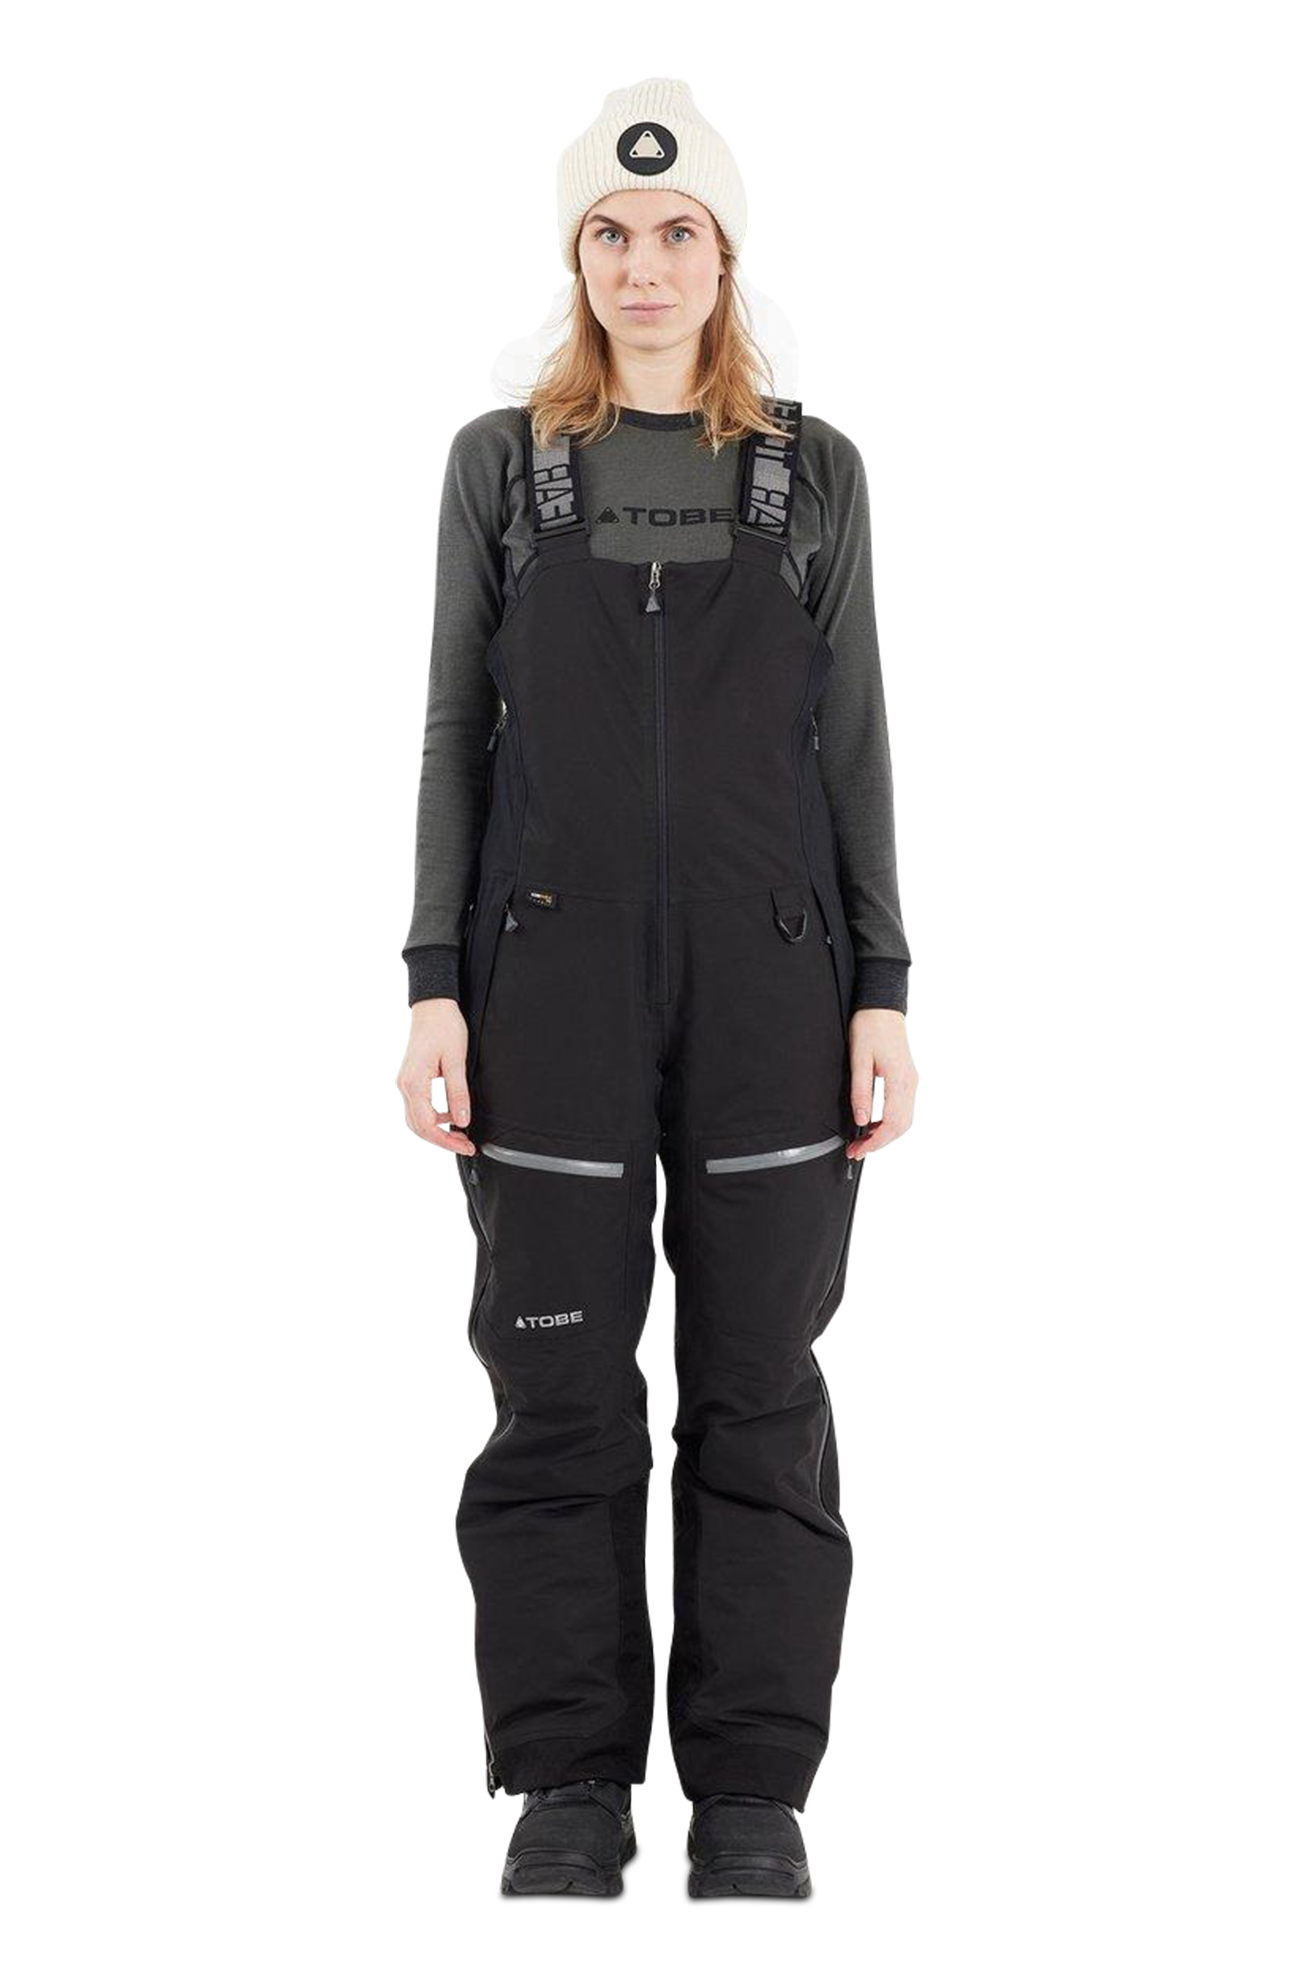 TOBE Outerwear Pantalones de Nieve Mujer  Cappa Insulated Negros